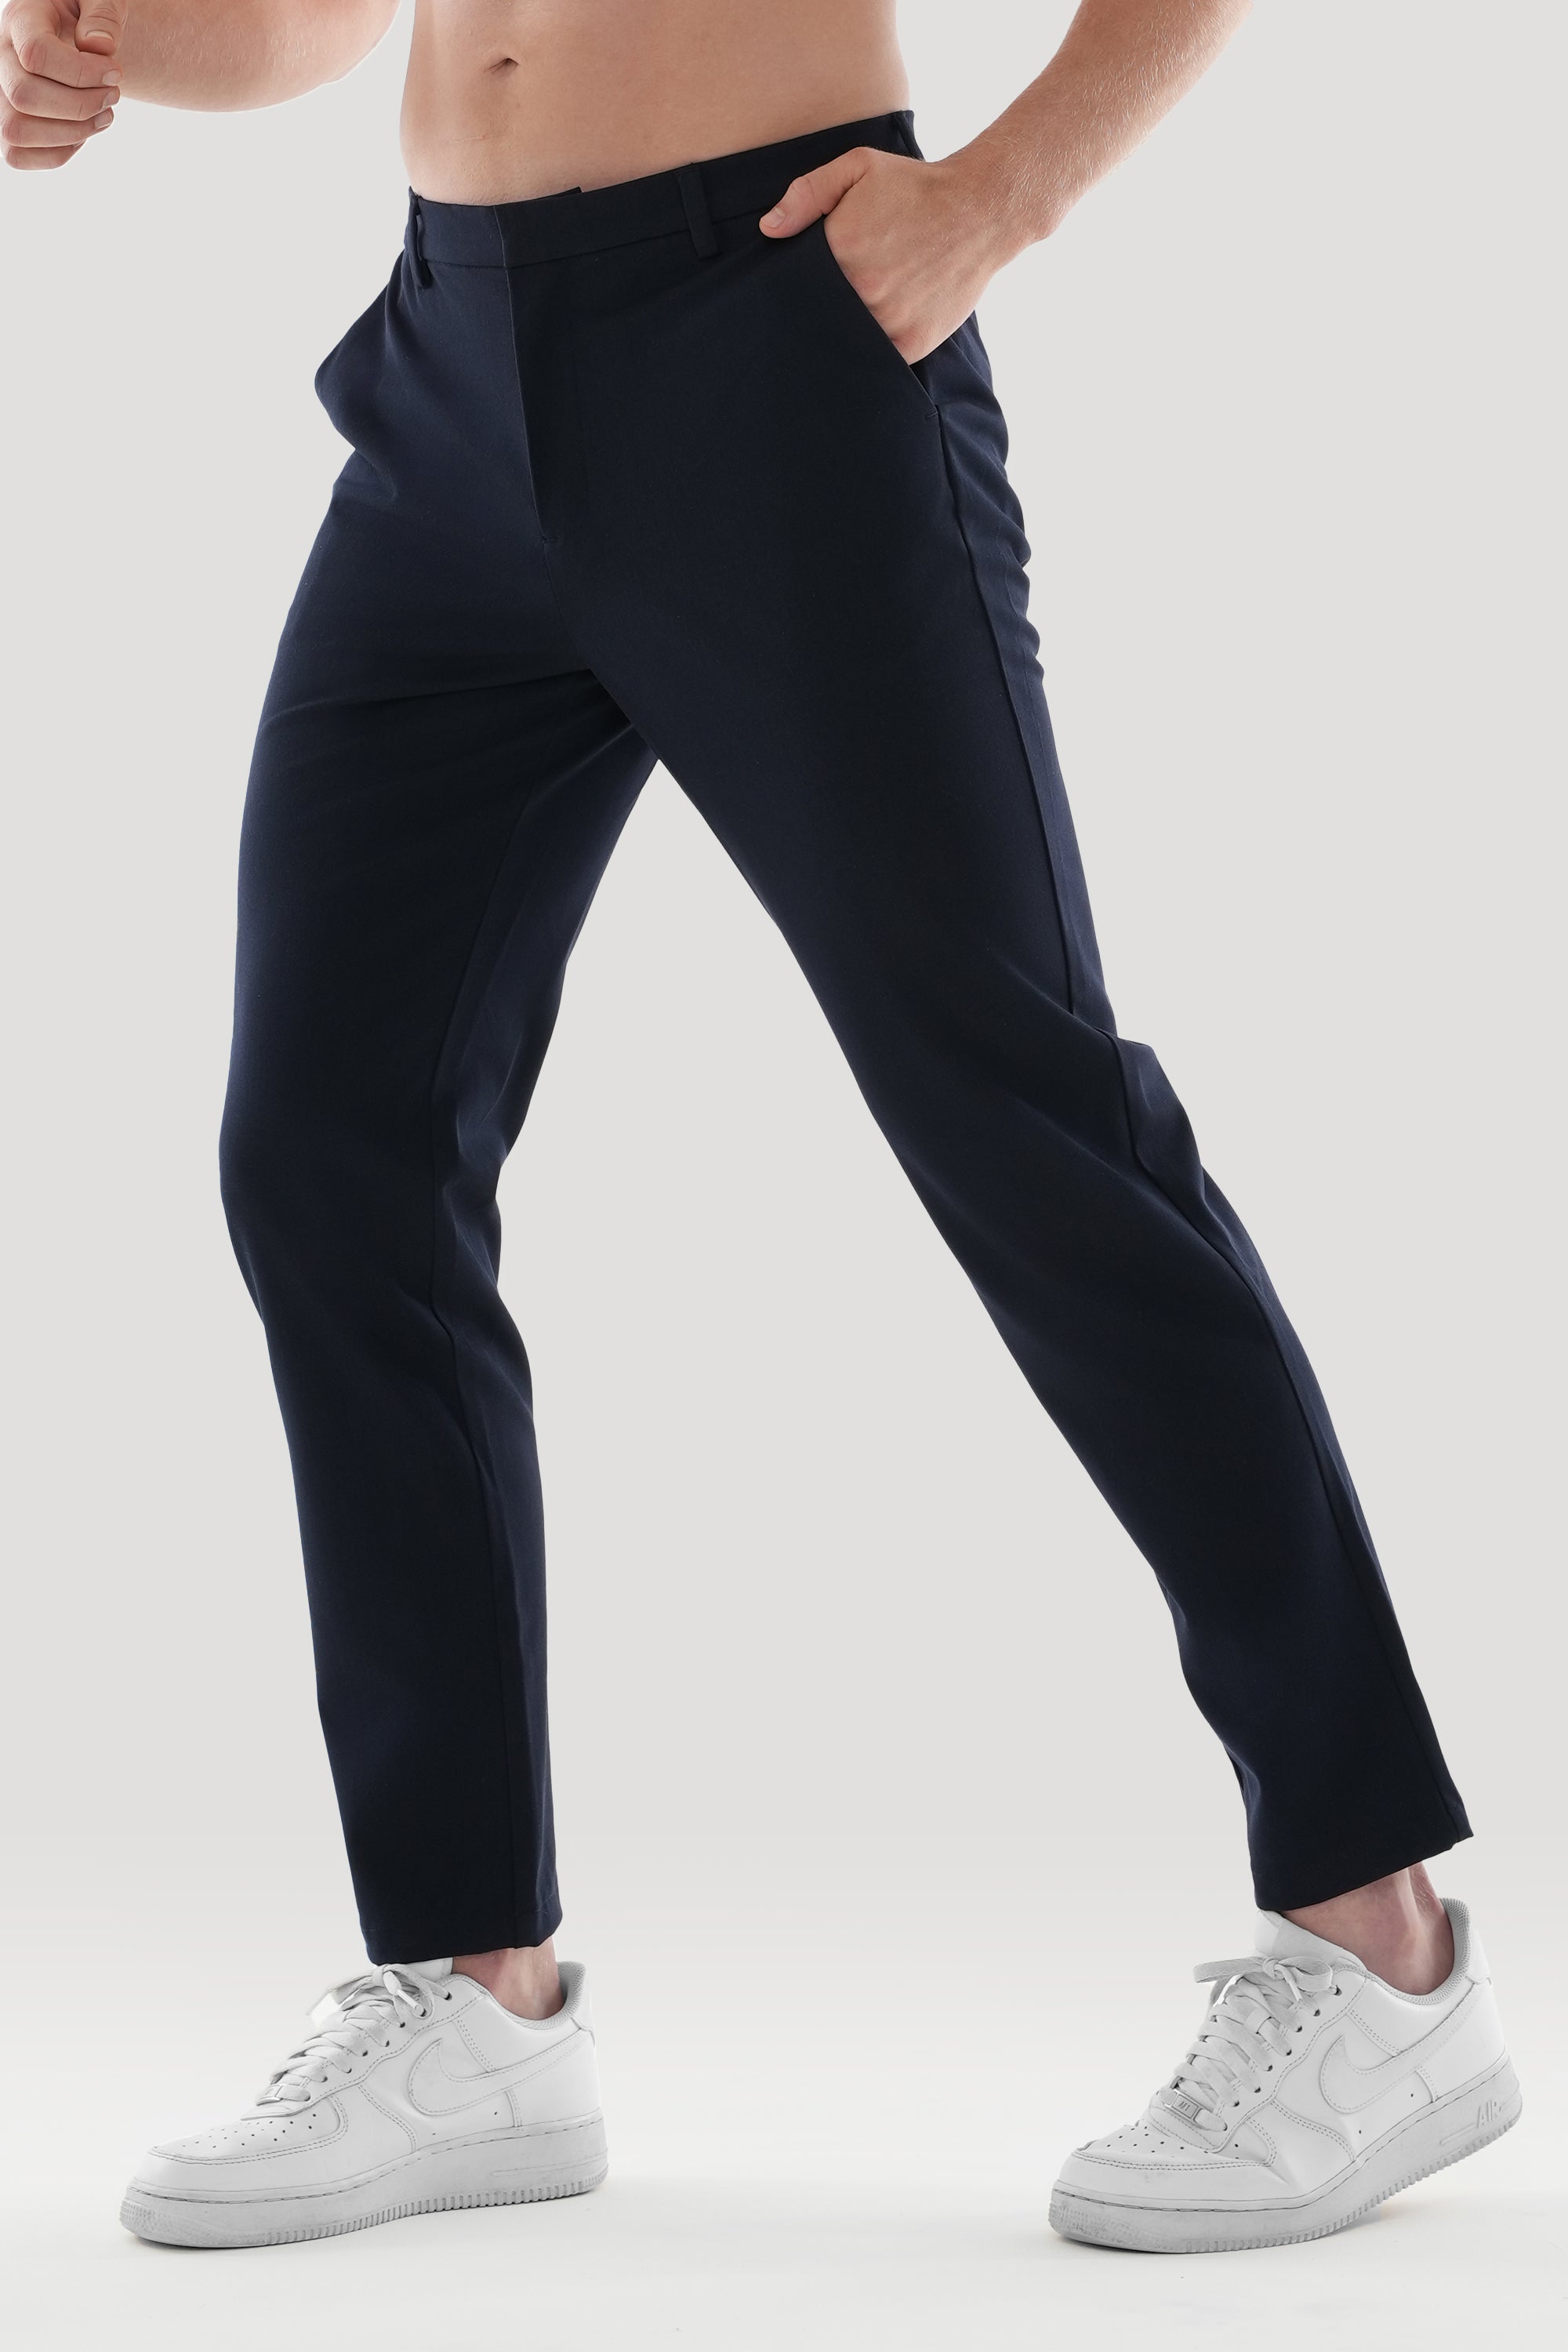 THE LUCIA TROUSERS - NAVY BLUE - ICON. AMSTERDAM